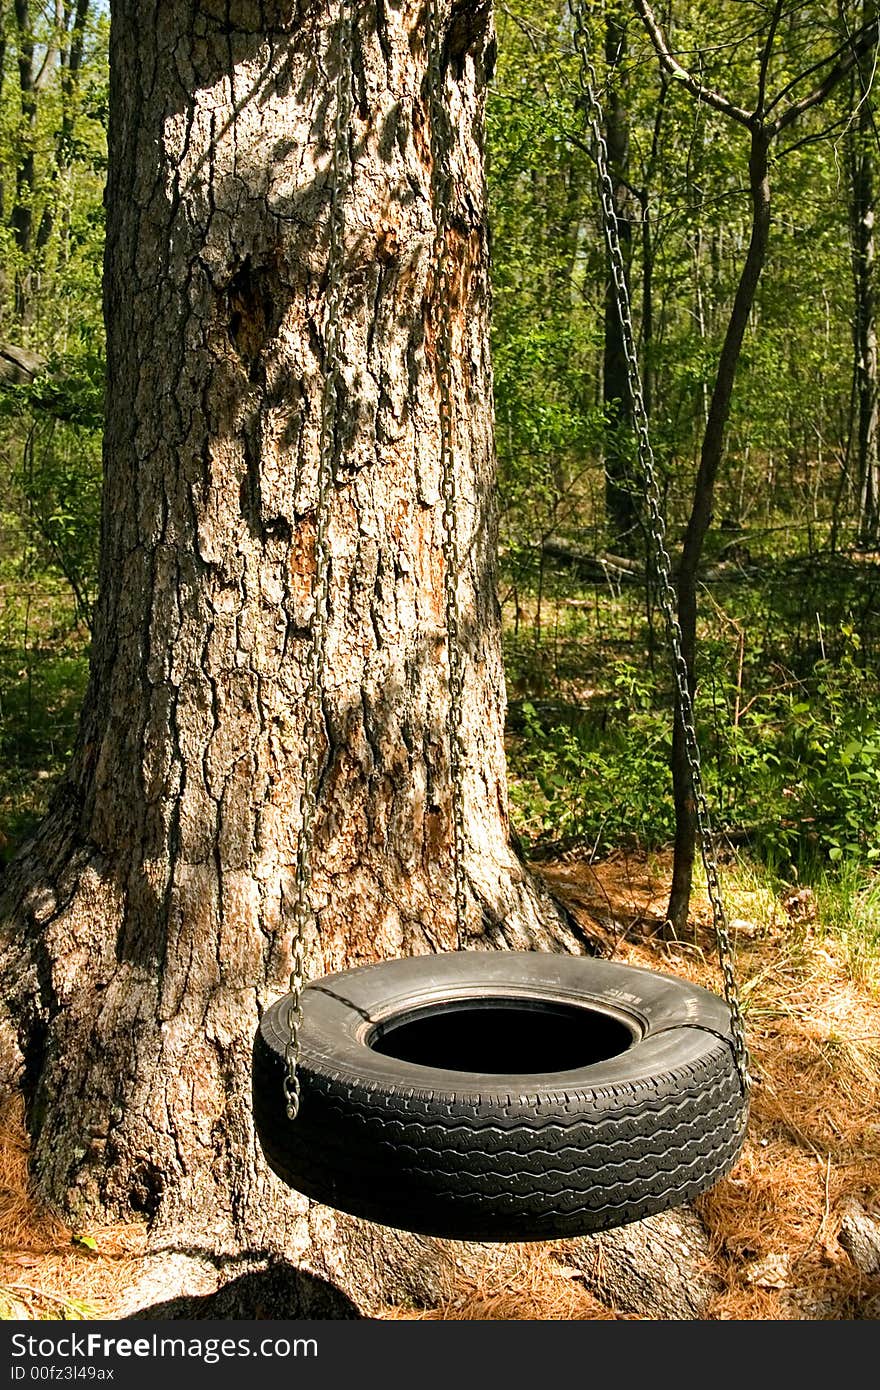 A tire swing out in the woods